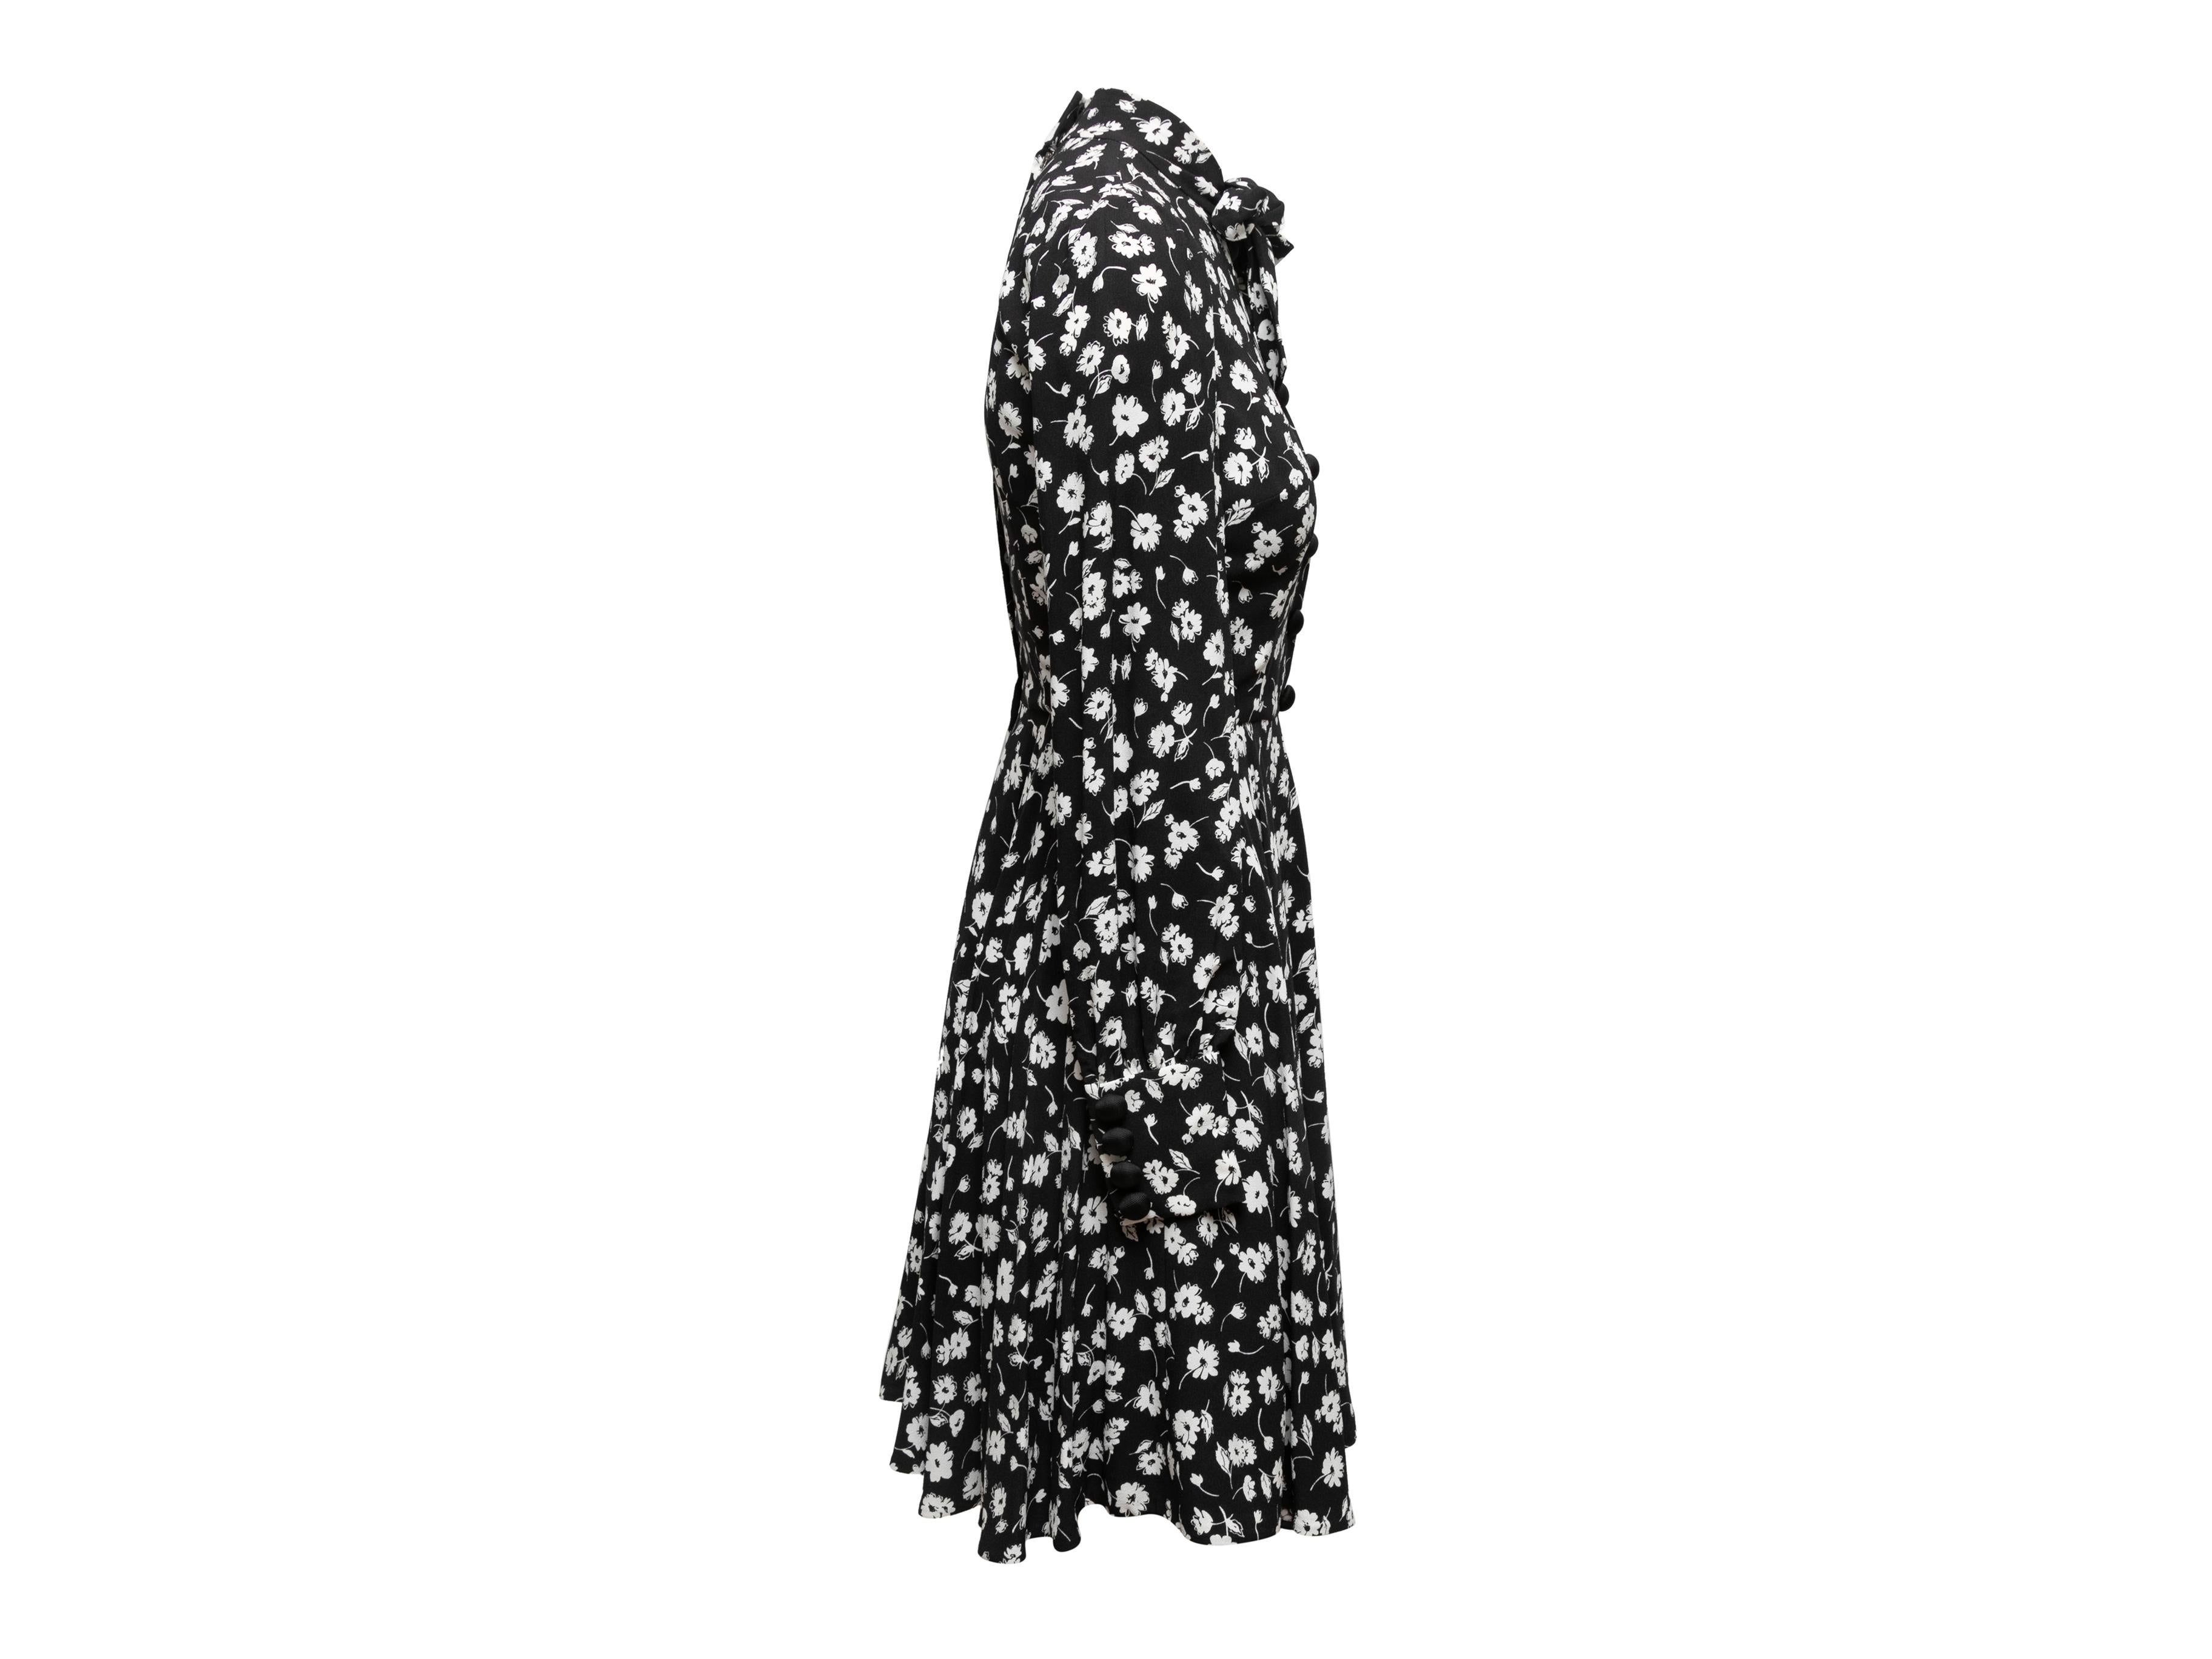 Black and white floral print long sleeve dress by Dolce & Gabbana. Pussy bow at neck. Buttons at front bodice. Zip closure at center back. Designer size 38. 33